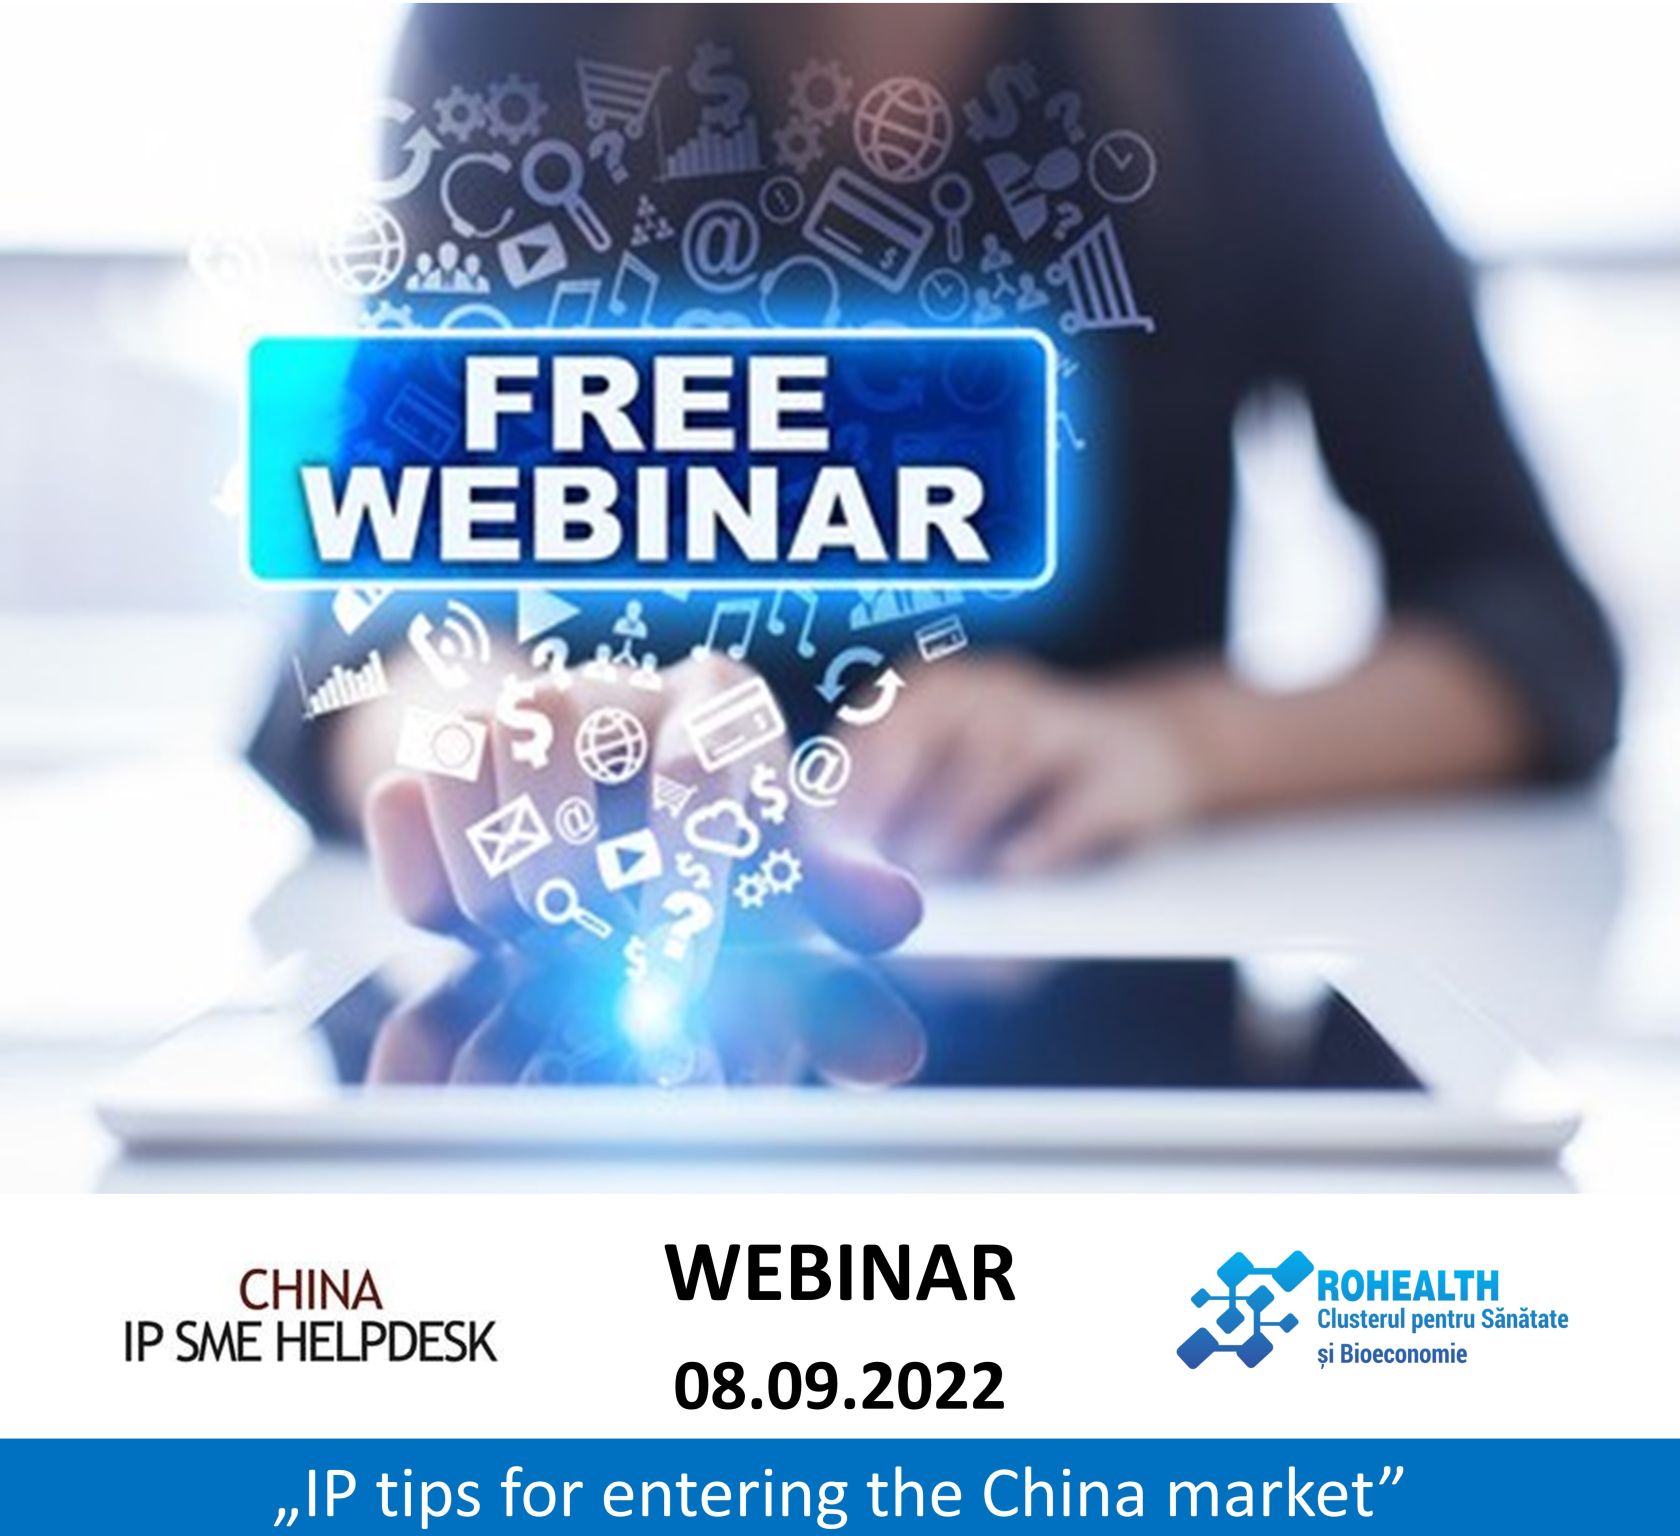 IP tips for entering the China market